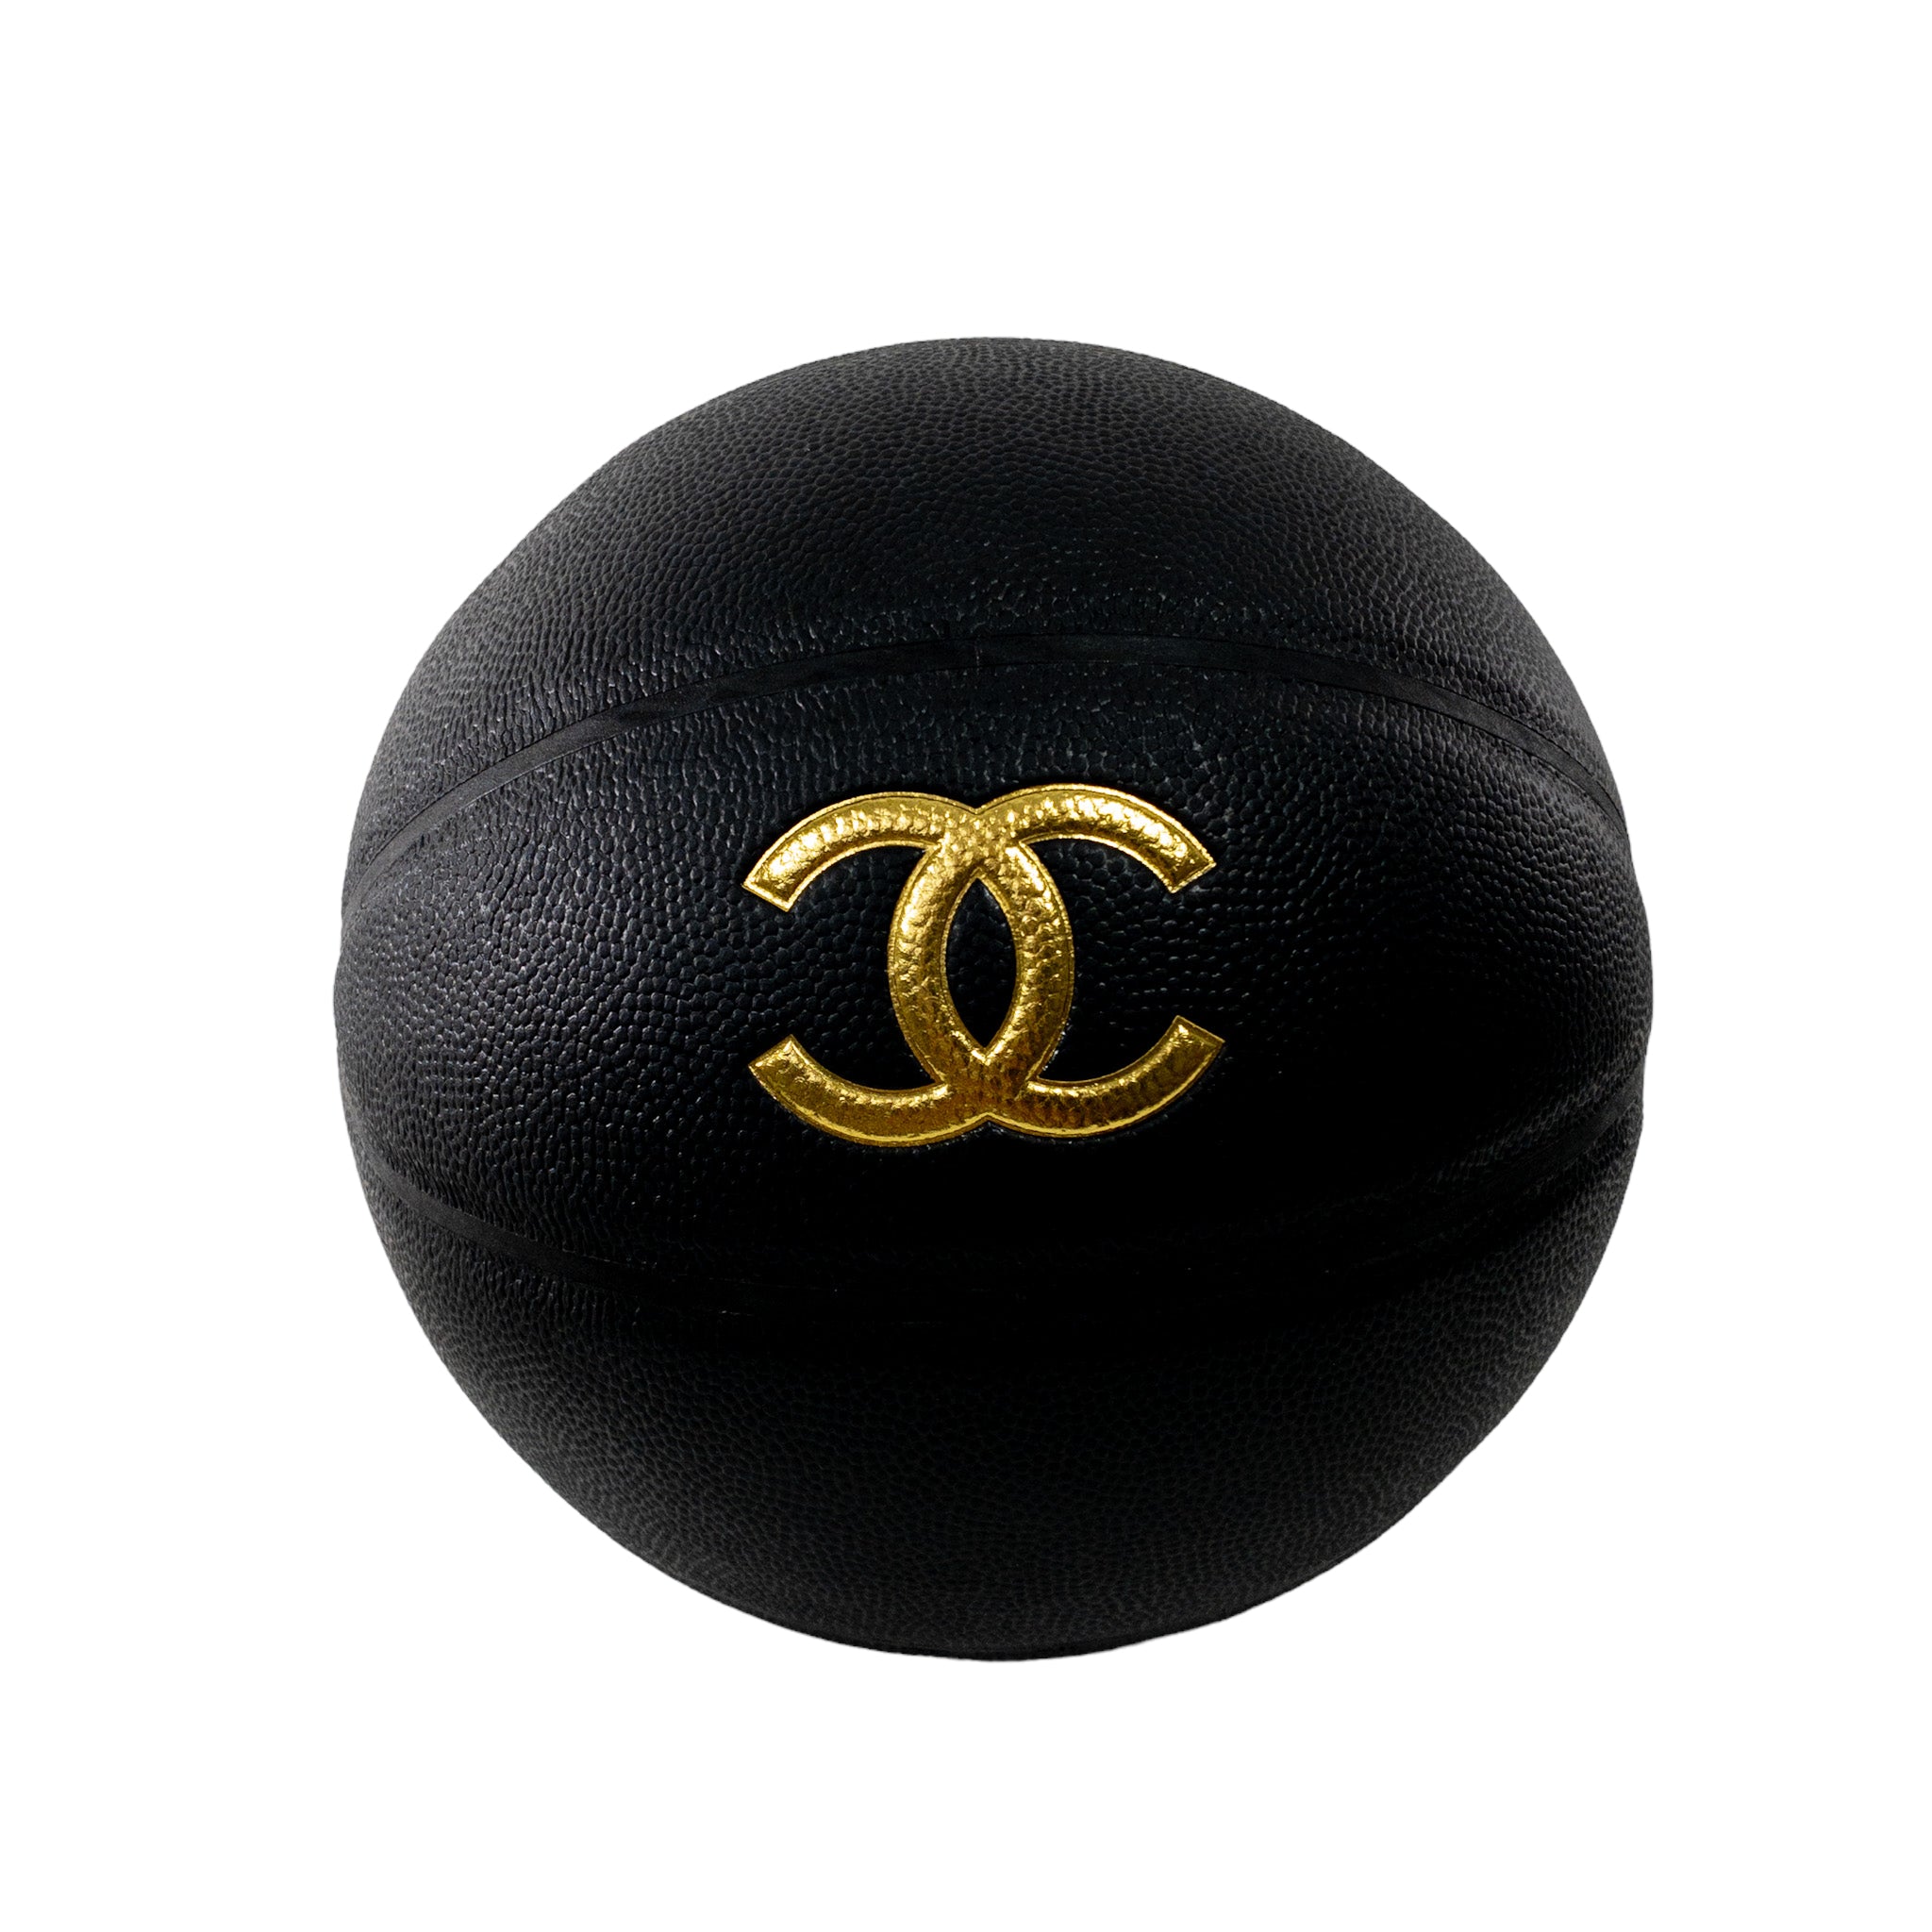 Chanel 2019 Limited Edition Basketball w/ Chain Harness